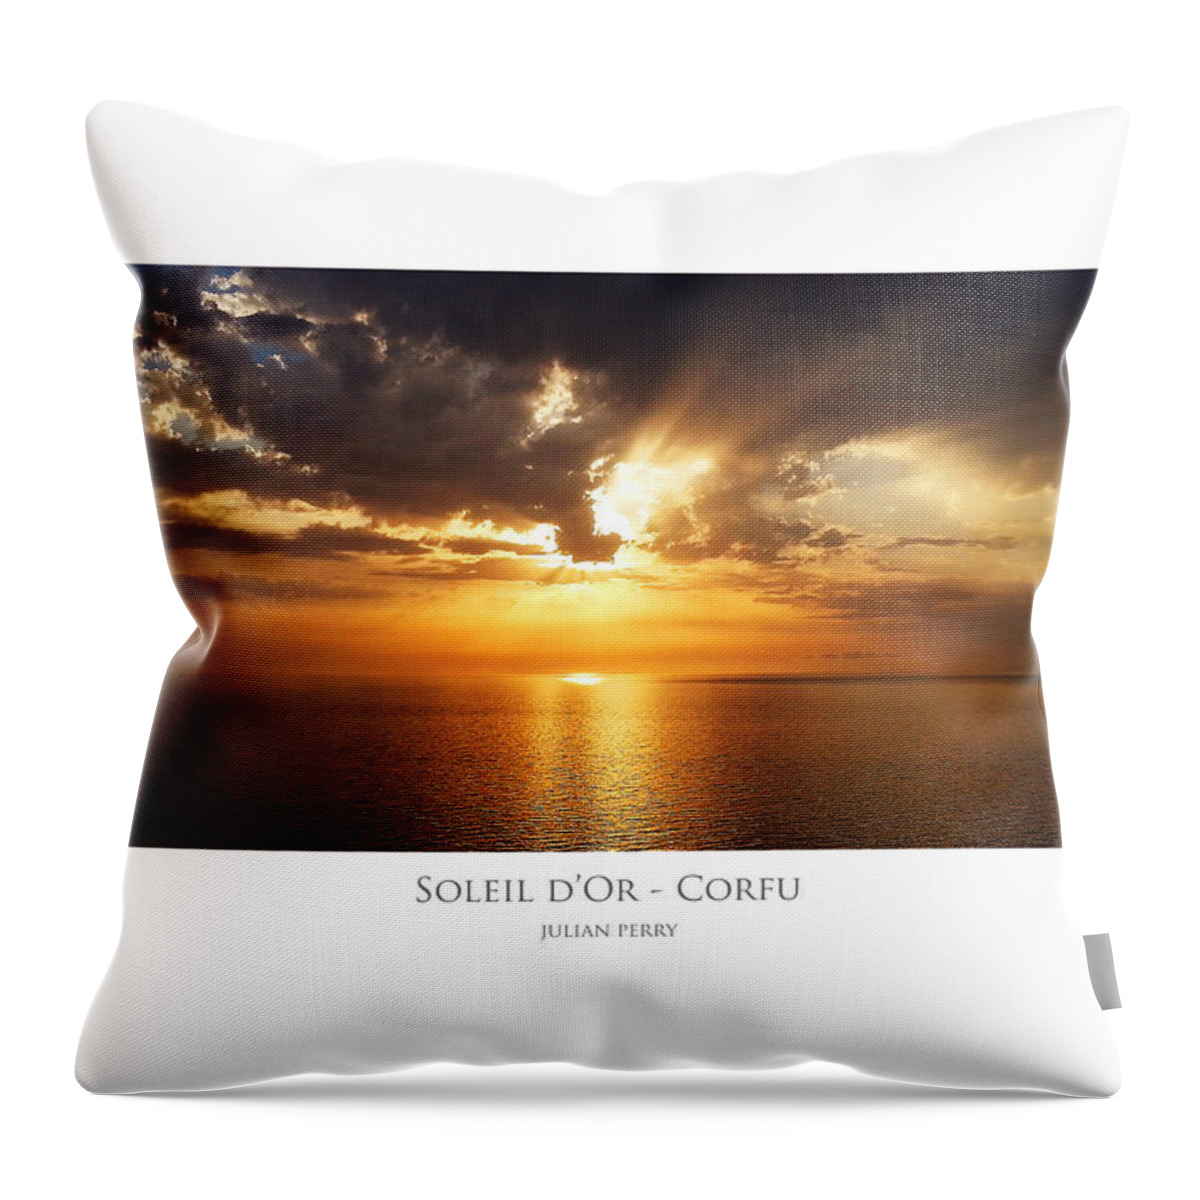 Beautiful Throw Pillow featuring the digital art Soleil d'Or - Corfu by Julian Perry